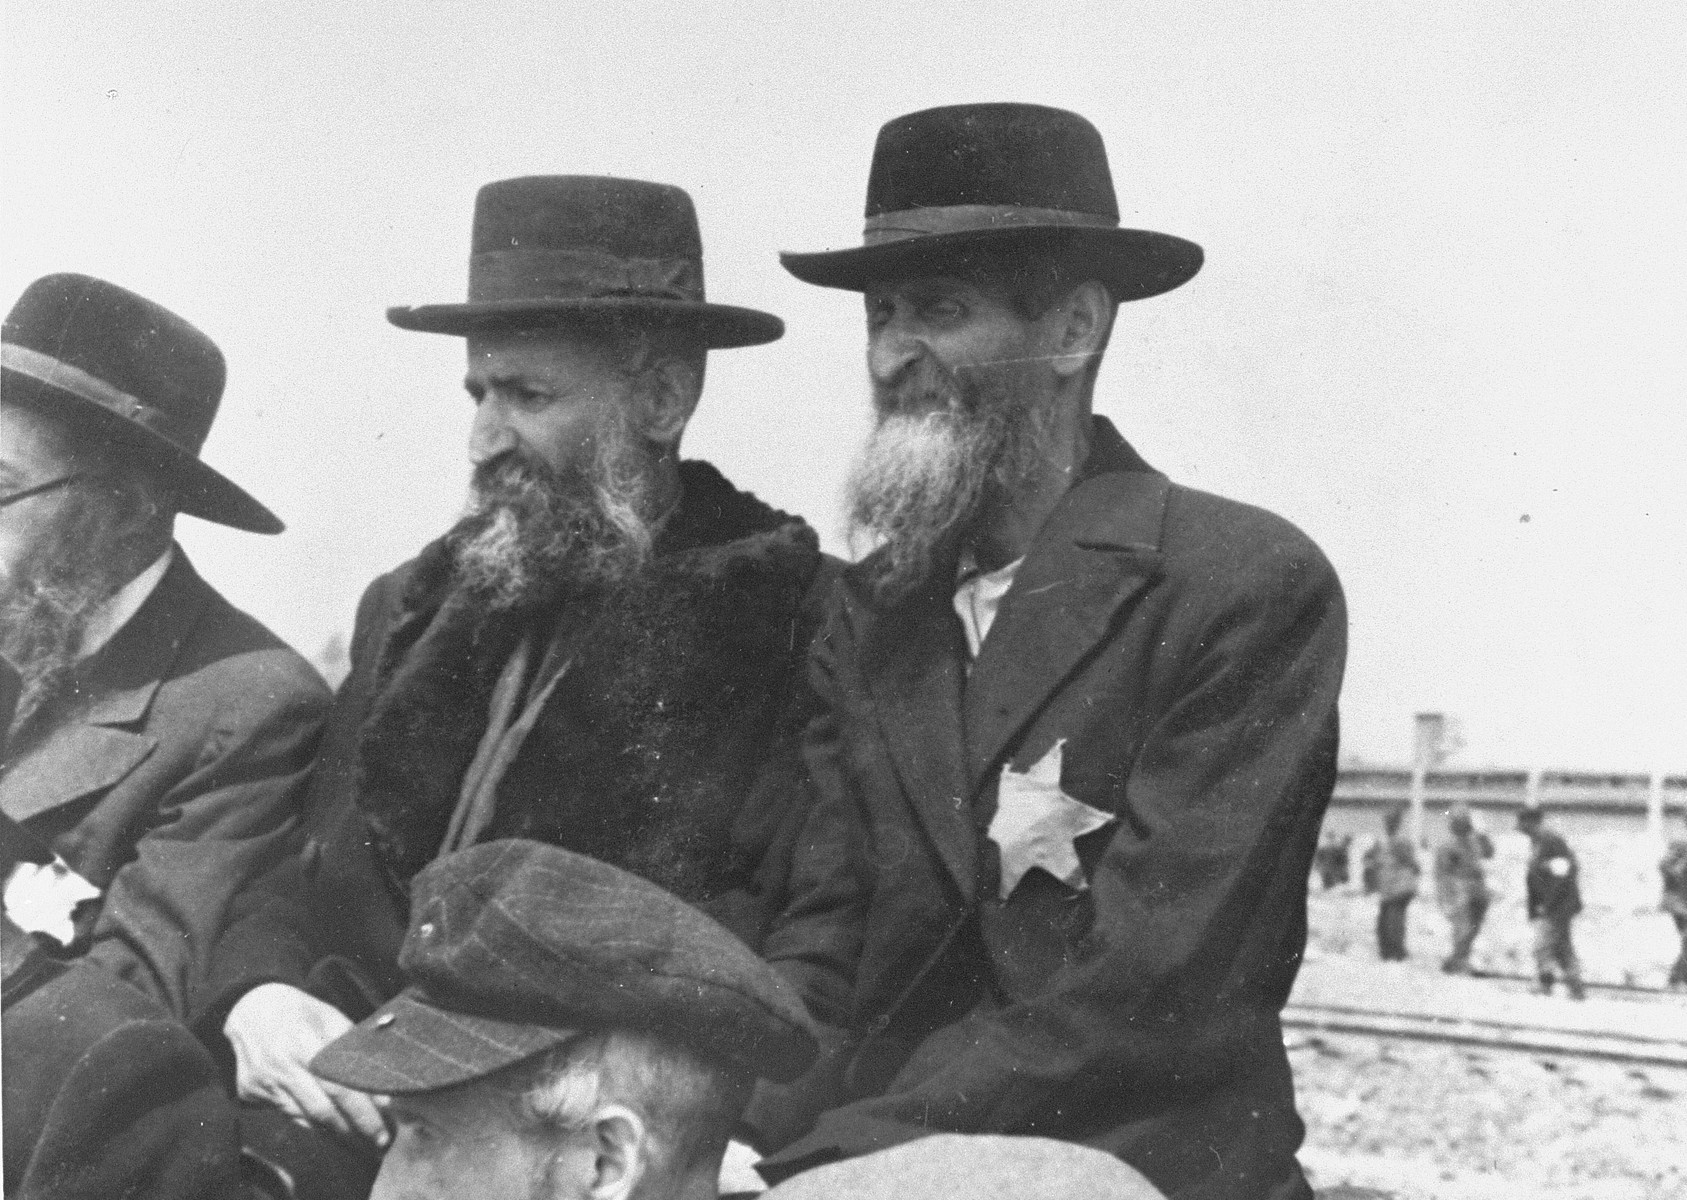 A group of religious Jews from Subcarpathian Rus wait on the ramp at Auschwitz-Birkenau.